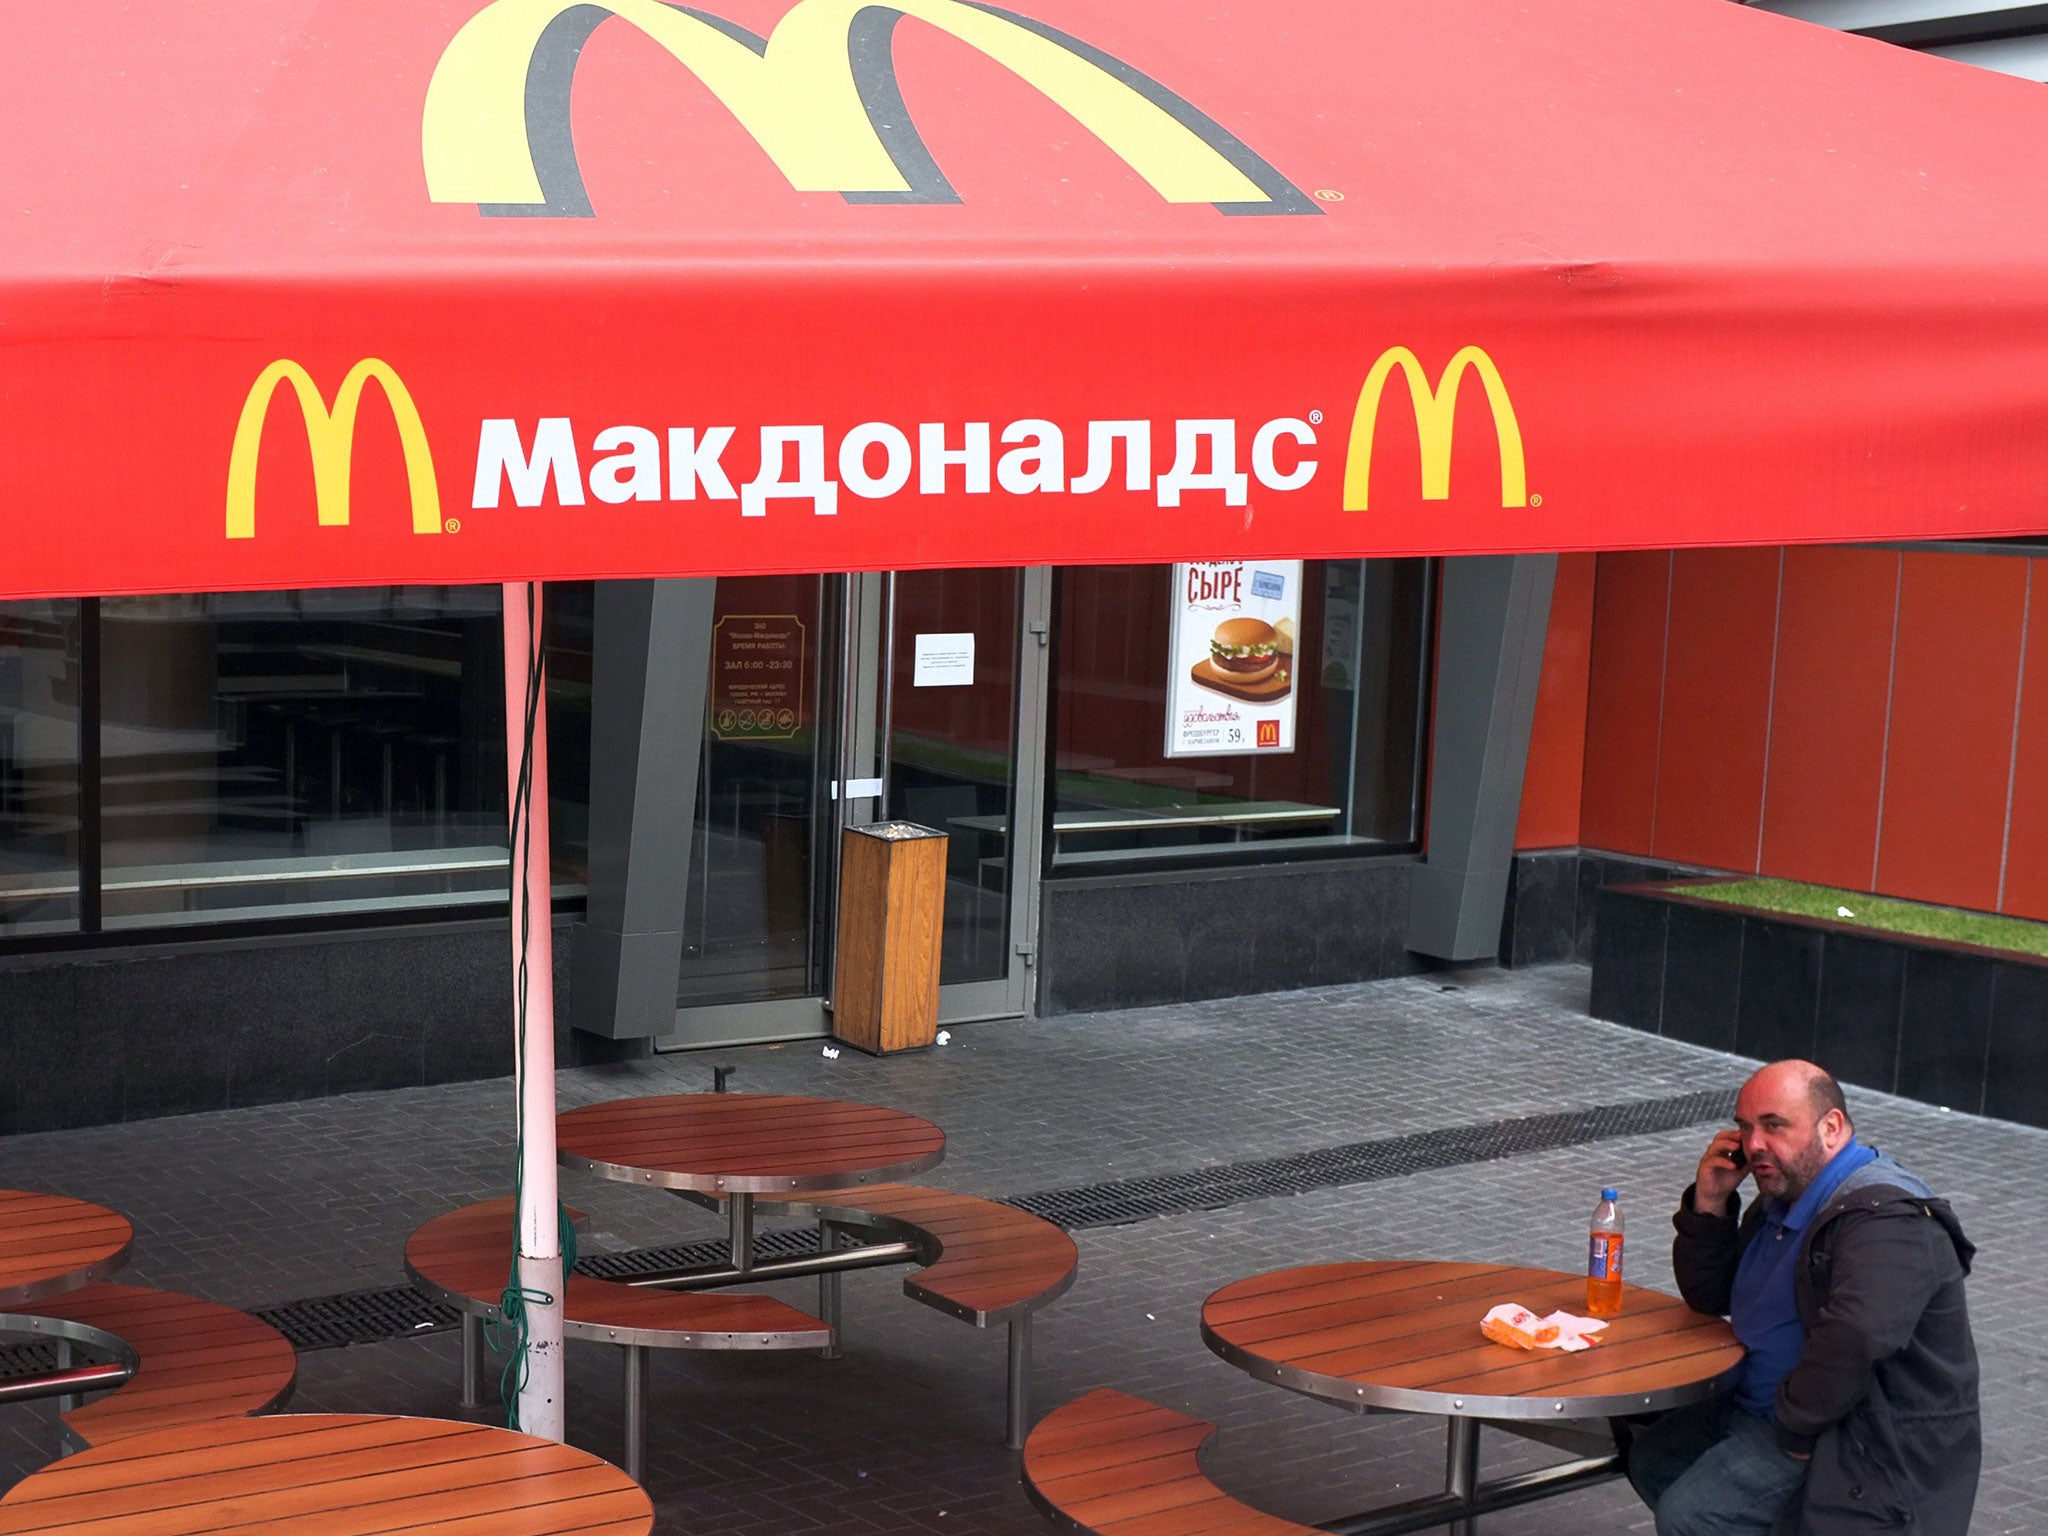 Russian authorities shuttered four Moscow McDonald's due to alleged sanitary violations on August 20, 2014, including a restaurant that once symbolised reviving Soviet-US ties, as tensions sizzled over Ukraine